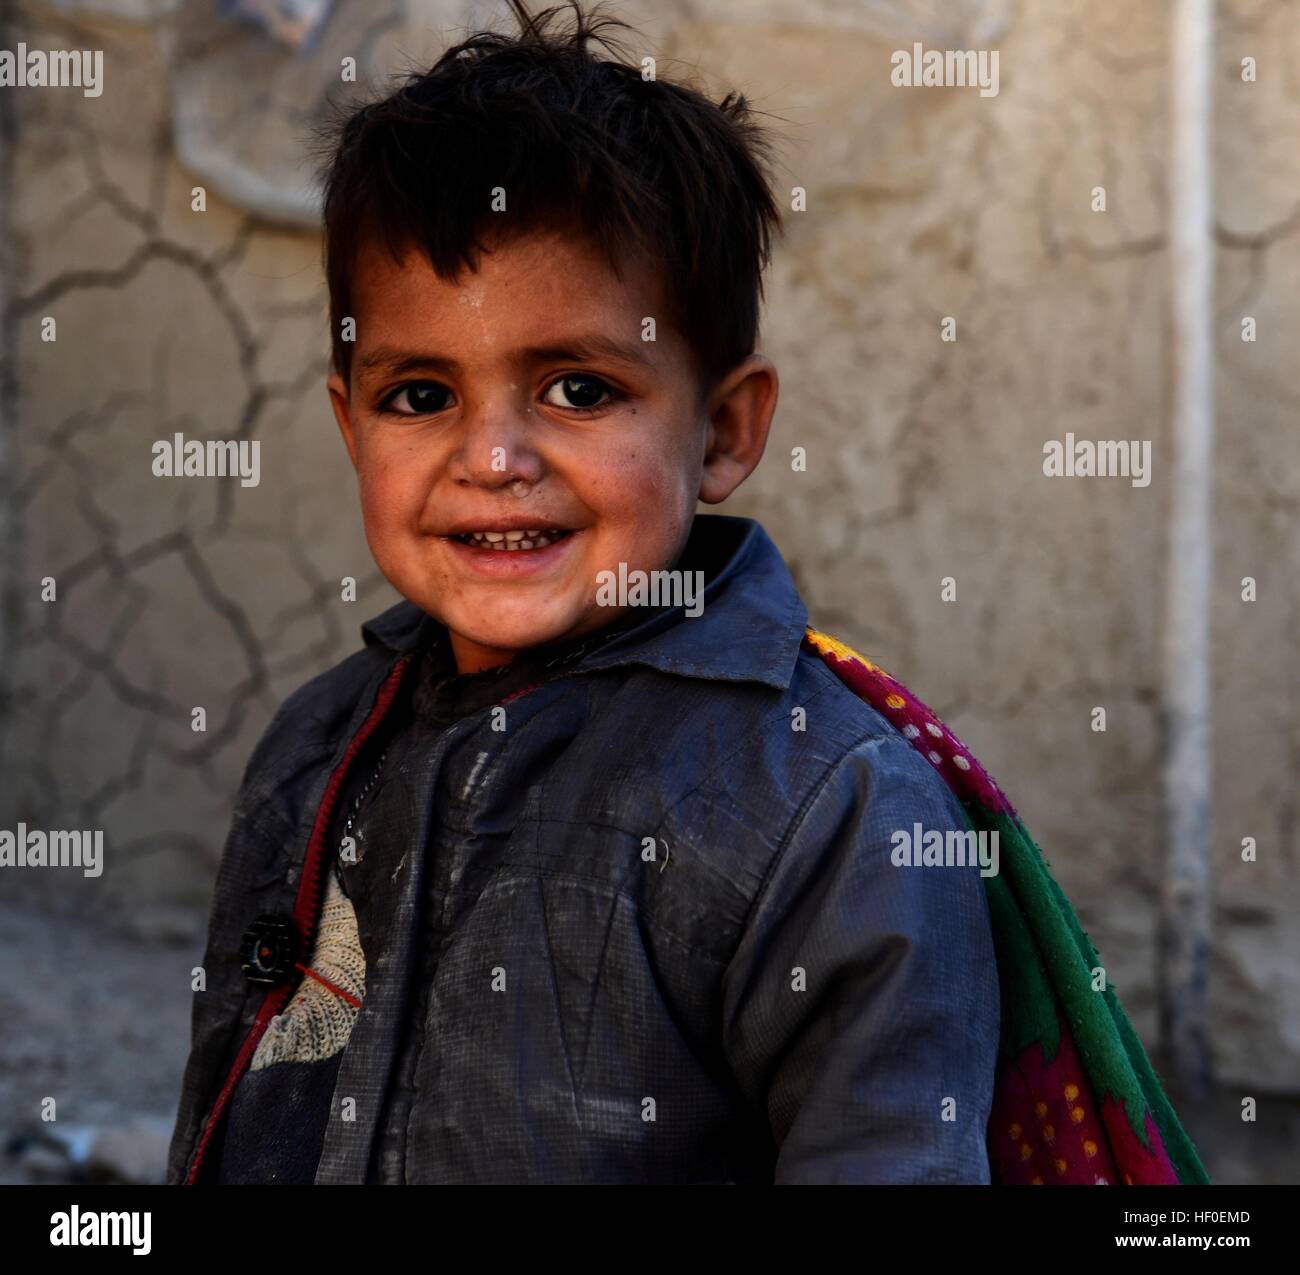 Qalat, Afghanistan's Zabul province. 26th Dec, 2016. An Afghan displaced child stands outside his tent in Qalat city, capital of southern Afghanistan's Zabul province, Dec. 26, 2016. More than one million people have to flee their home due to conflicts in the country, according to officials. © Sanaullah Seiam/Xinhua/Alamy Live News Stock Photo